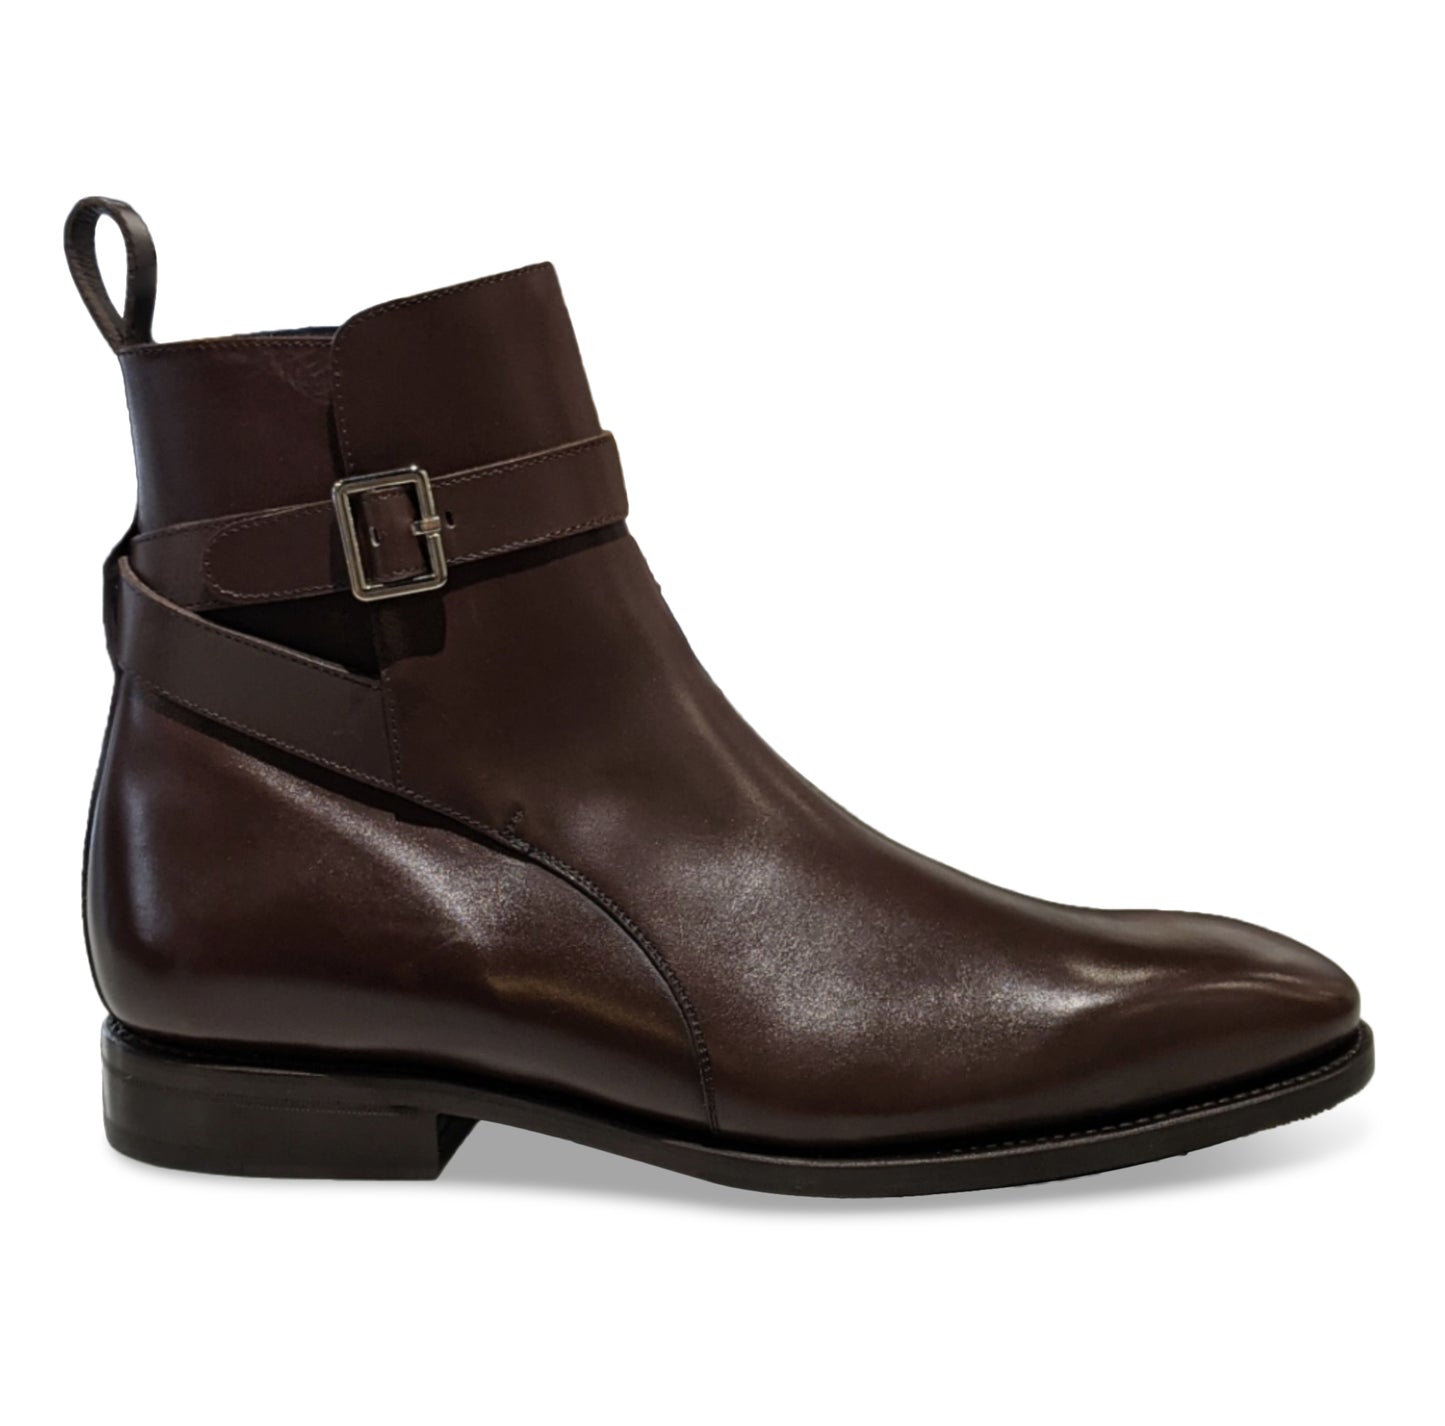 stride c with Leather strap for tight ankle fit